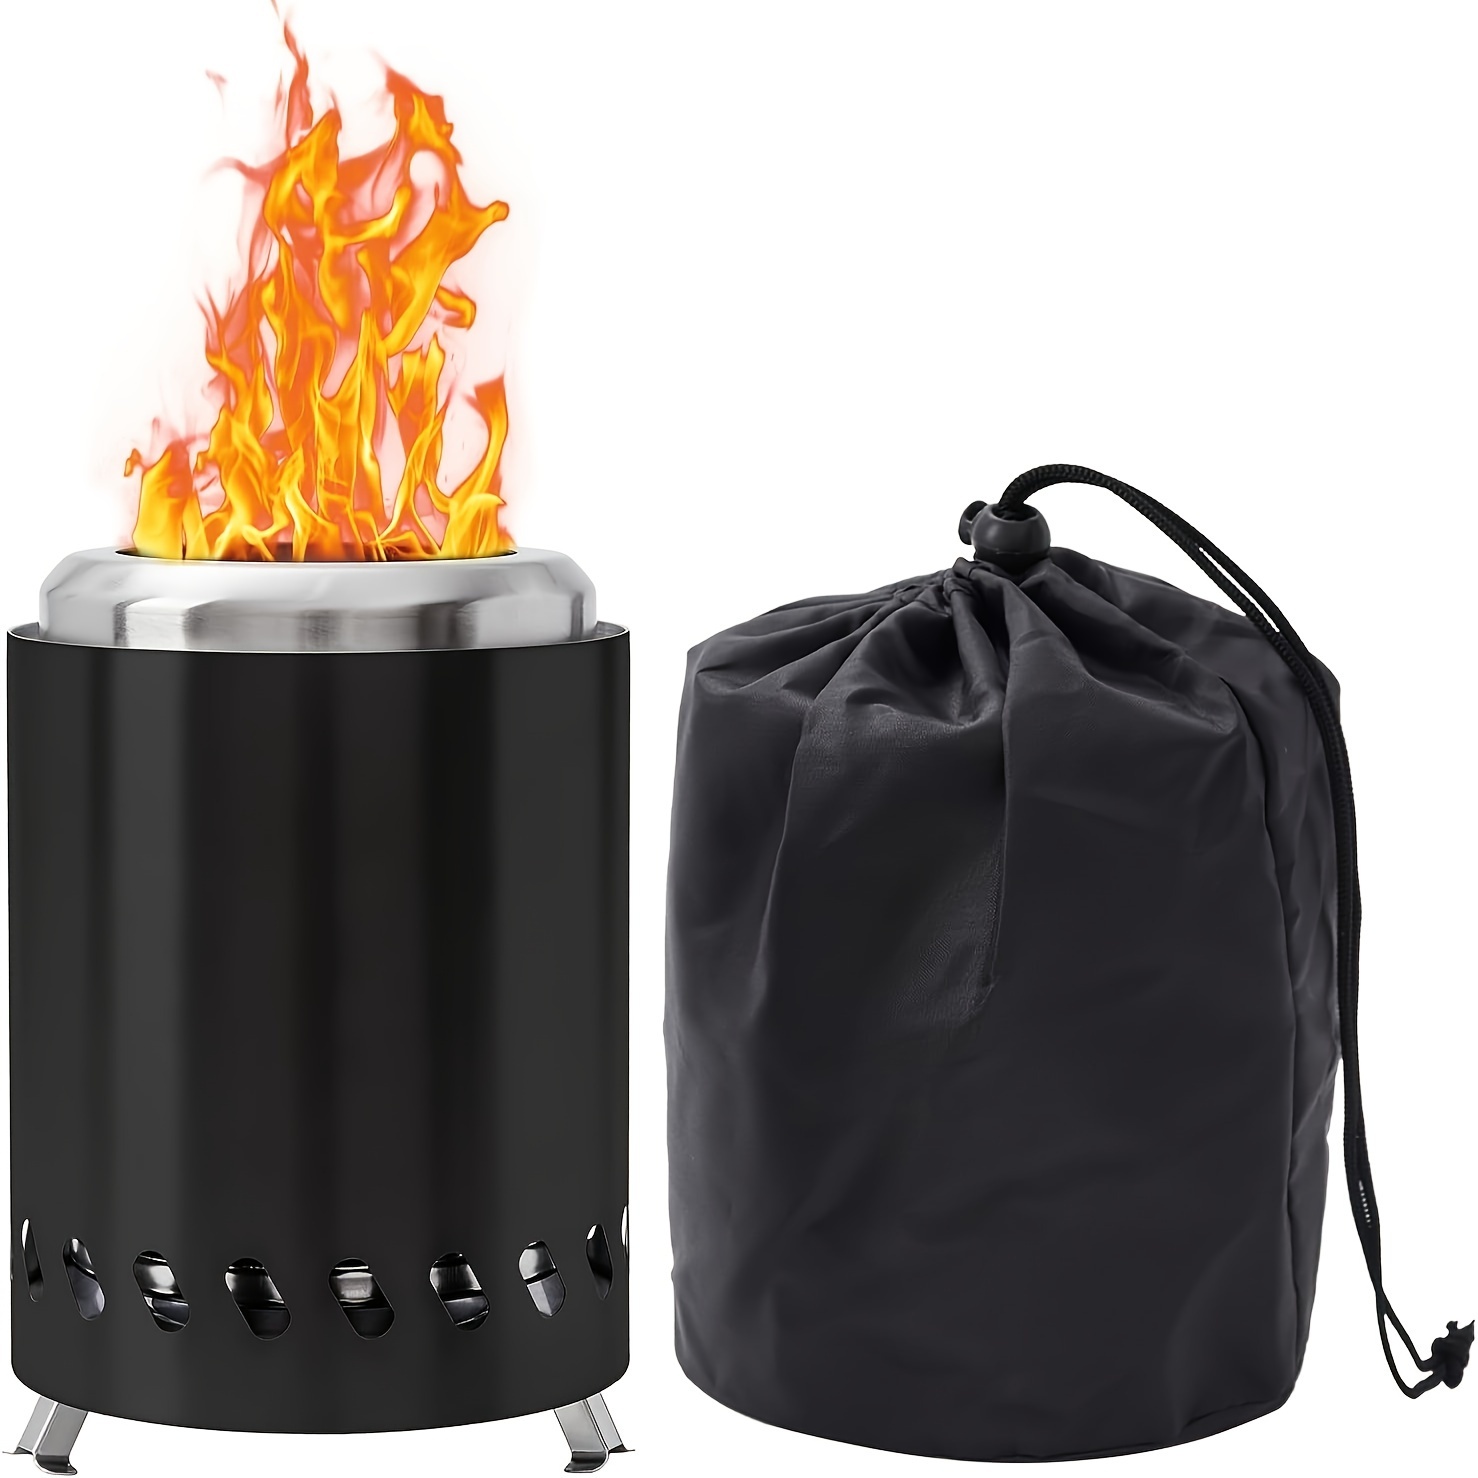 

Portable Fire Pit, Smokeless Fireplace Desktop, Small Fire Pits In Urban And Areas, Stainless Steel, Fueled By Particles Or Wood, With Handbag